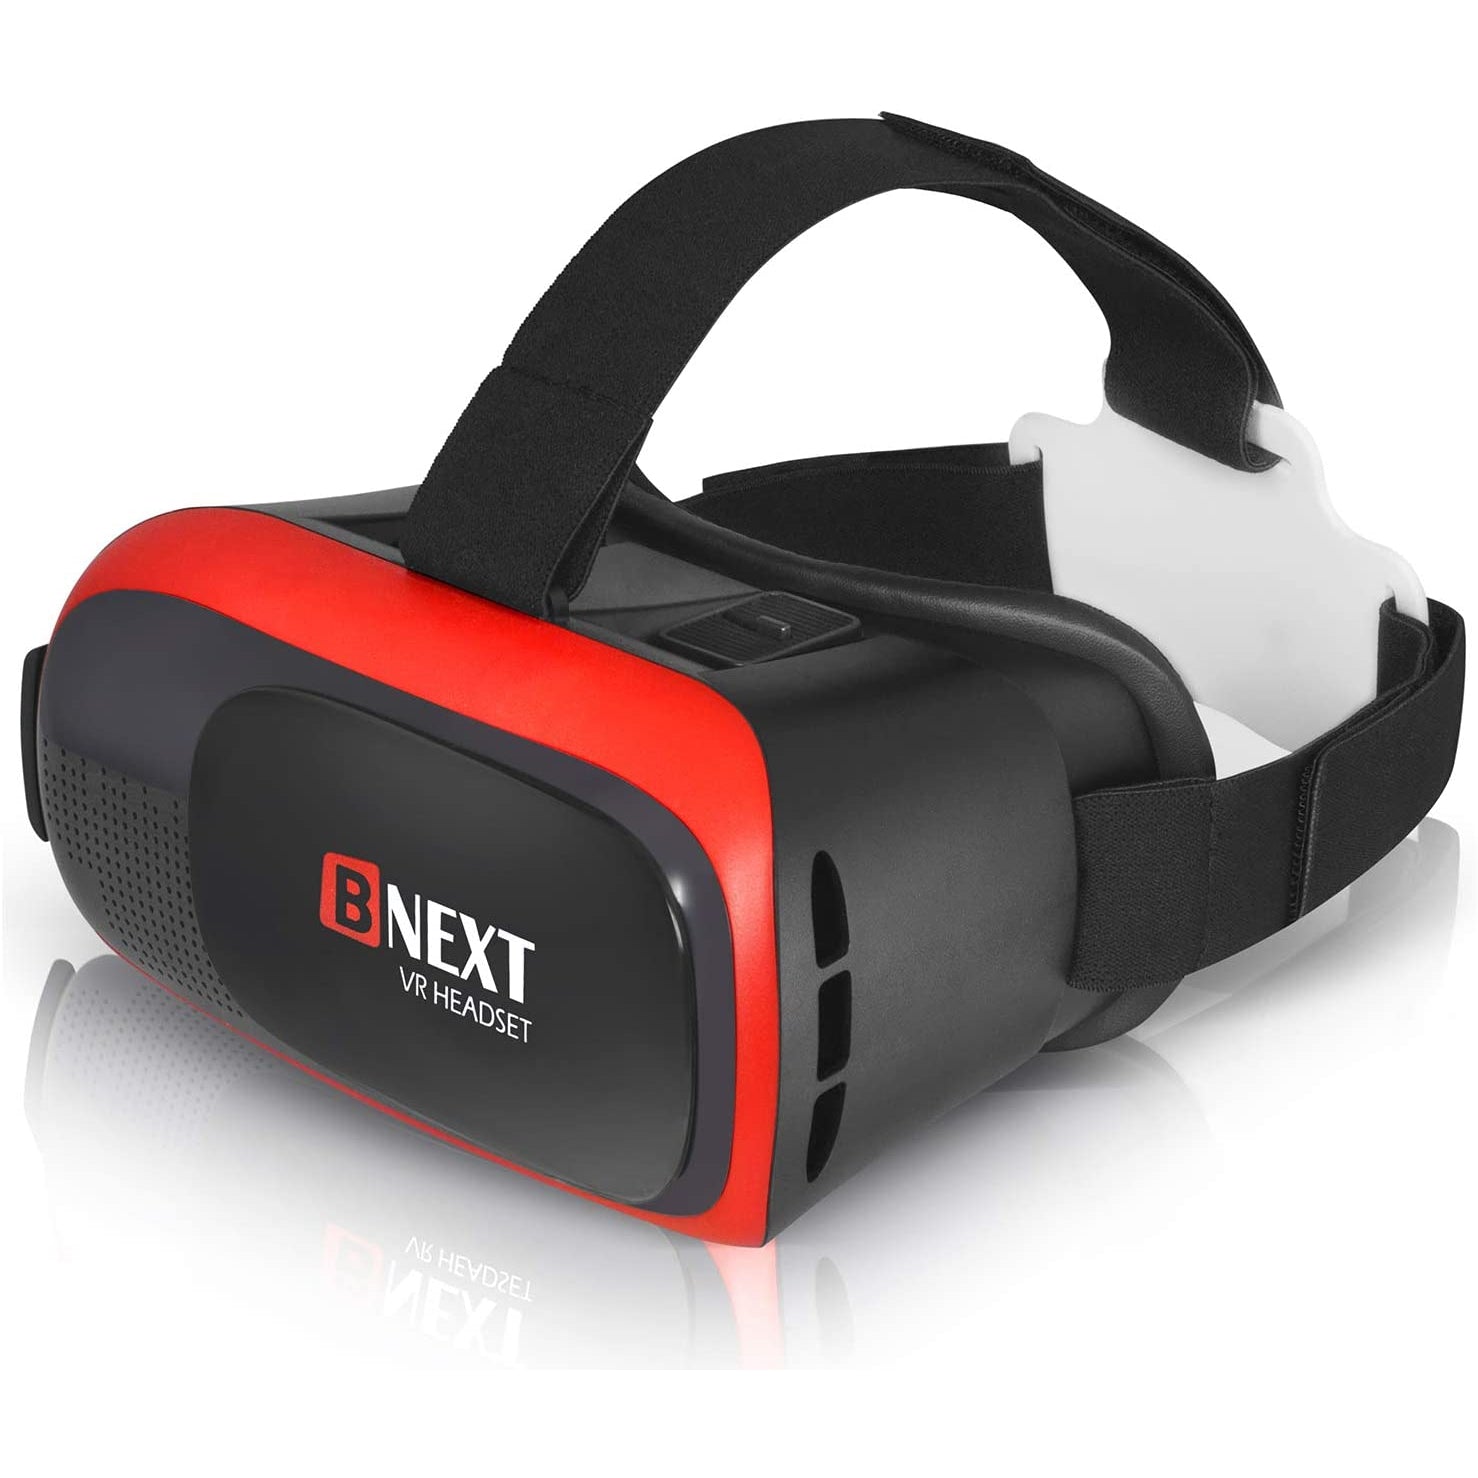 Bnext VR Headset Compatible with iPhone & Android Phone - No Remote - Universal Virtual Reality Goggles